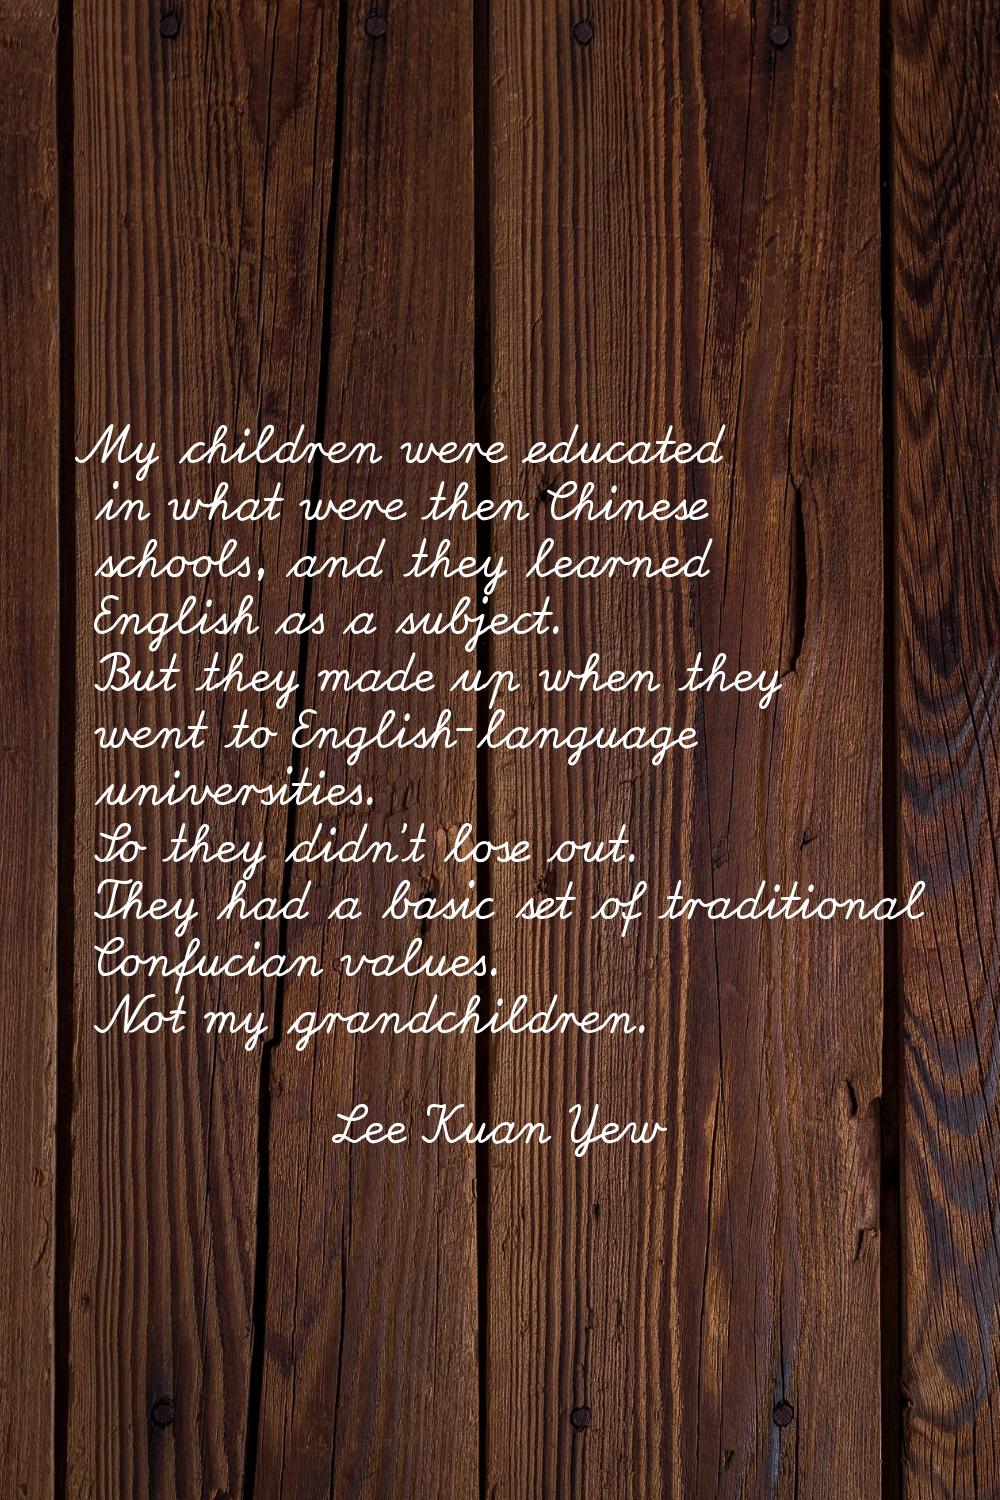 My children were educated in what were then Chinese schools, and they learned English as a subject.